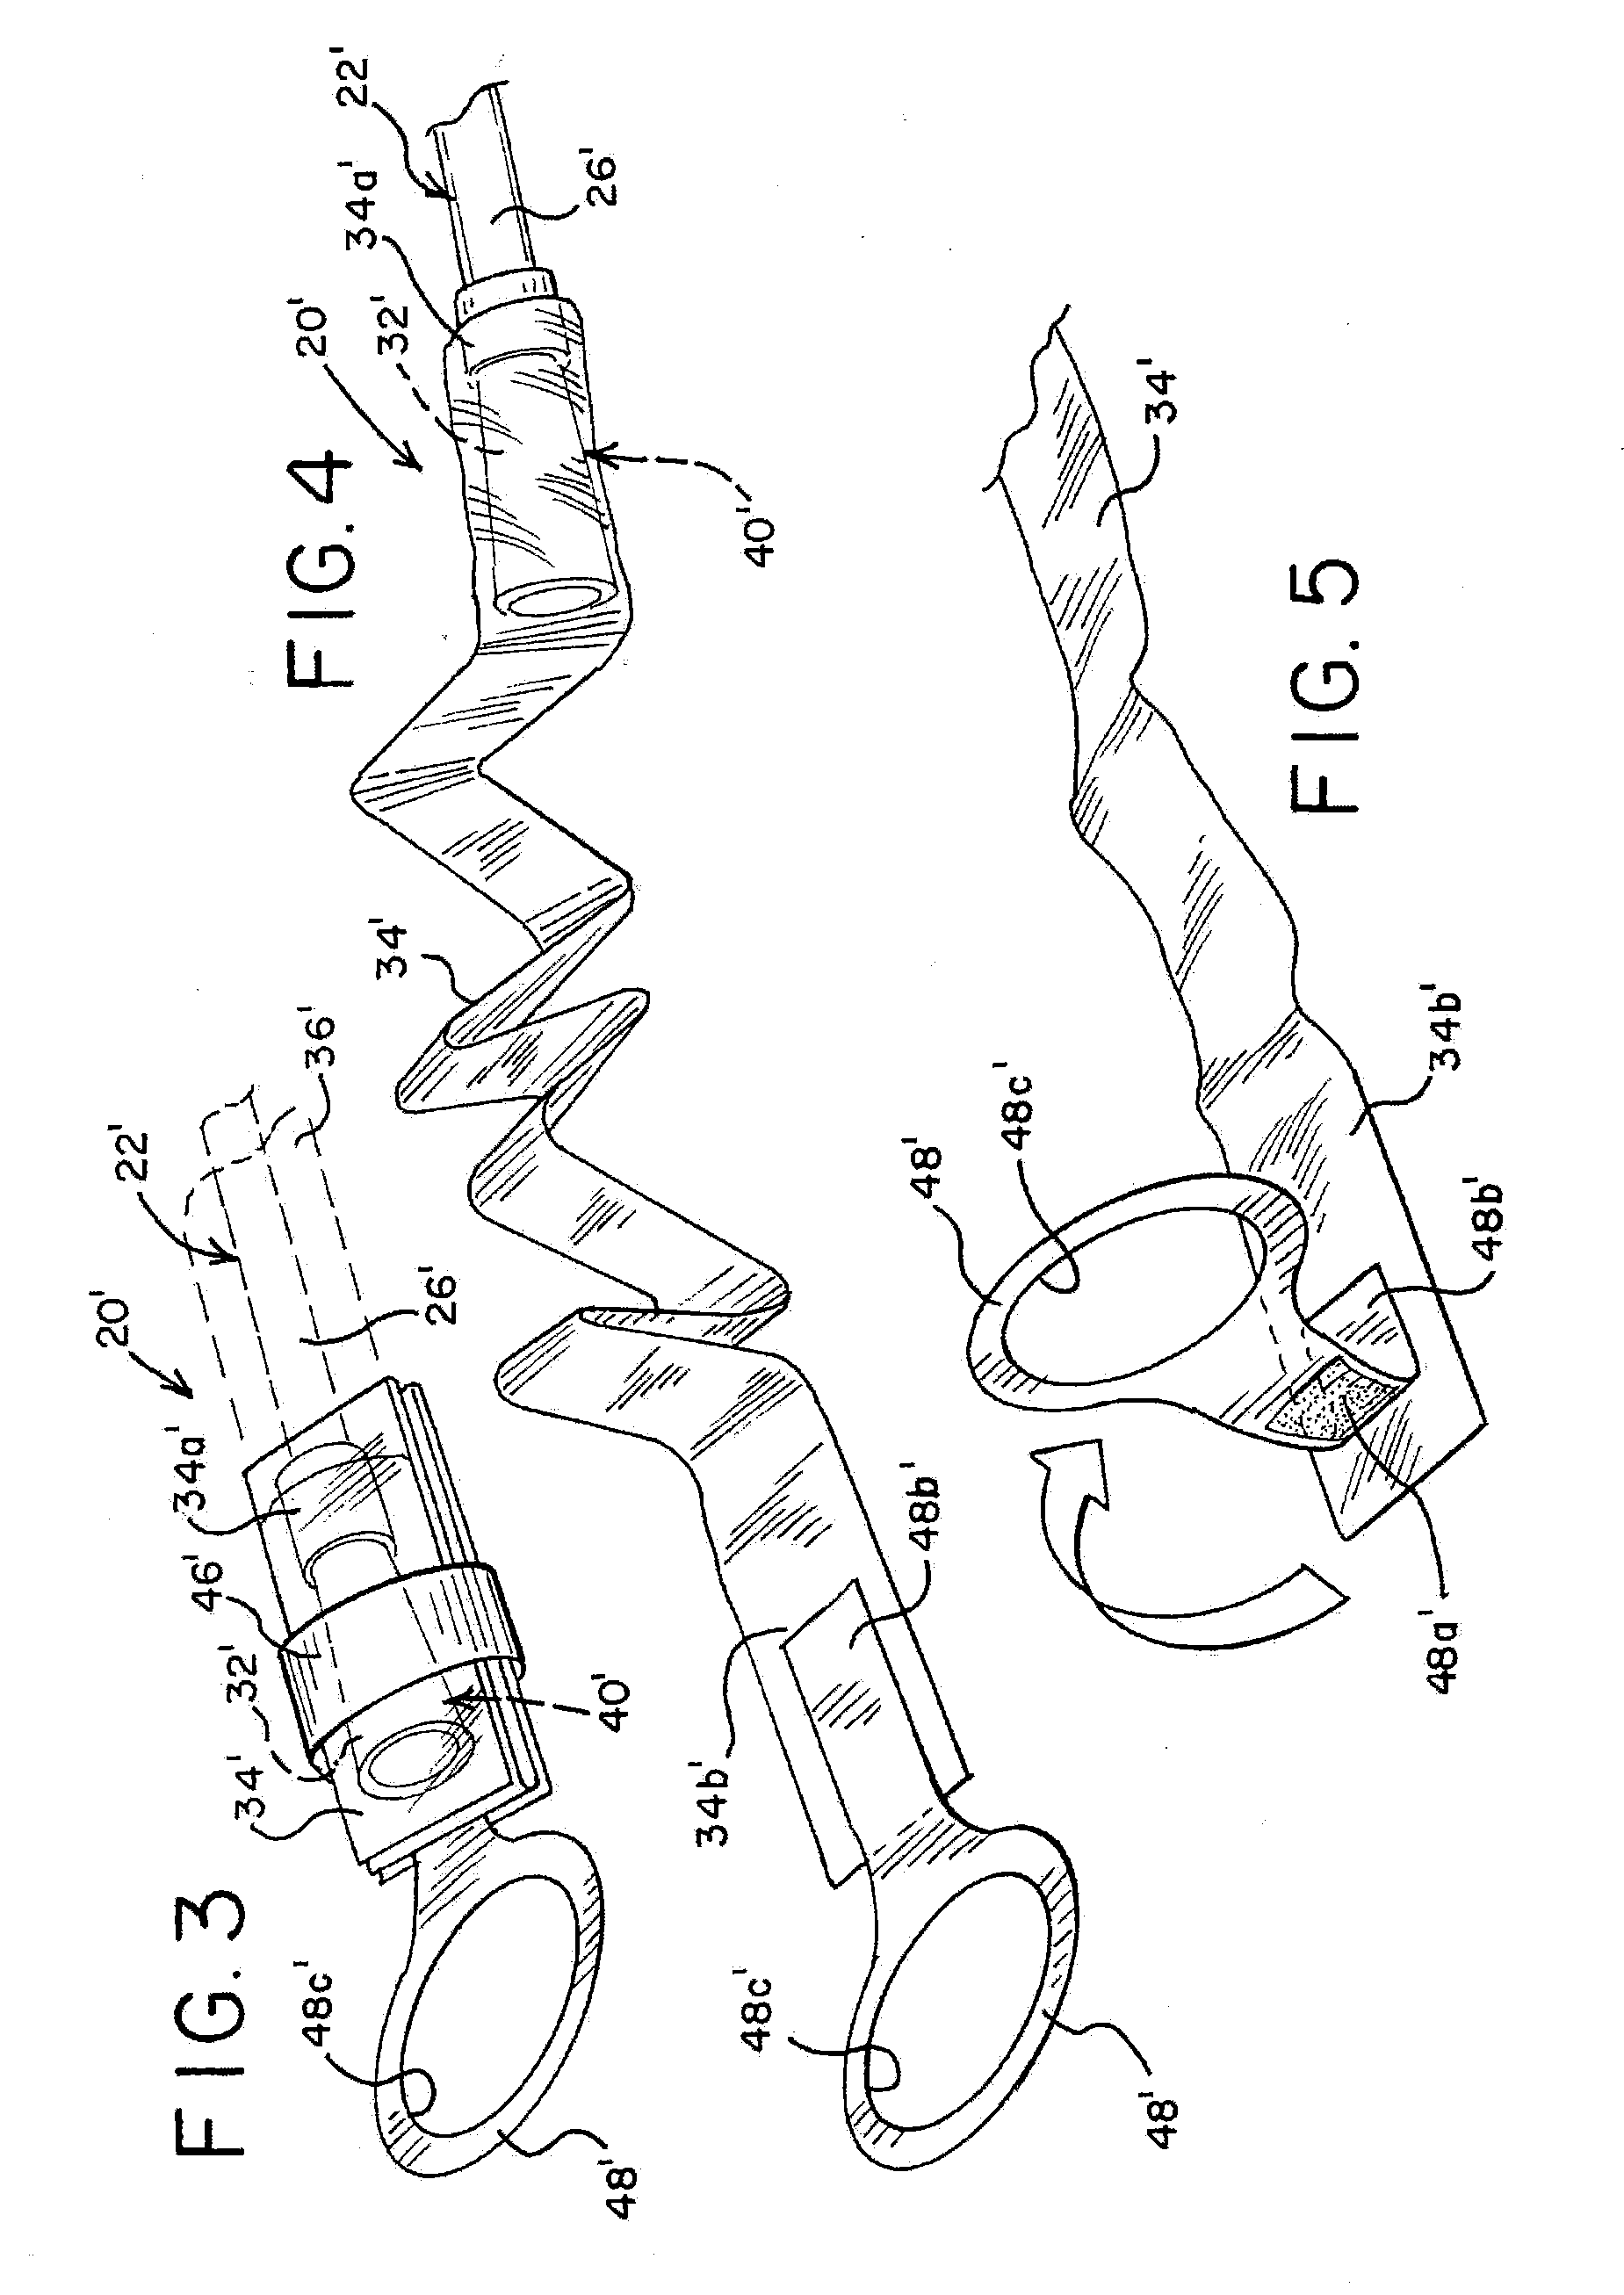 Intermittent urinary catheter assembly and an adapter assembly for an intermittent urinary catheter